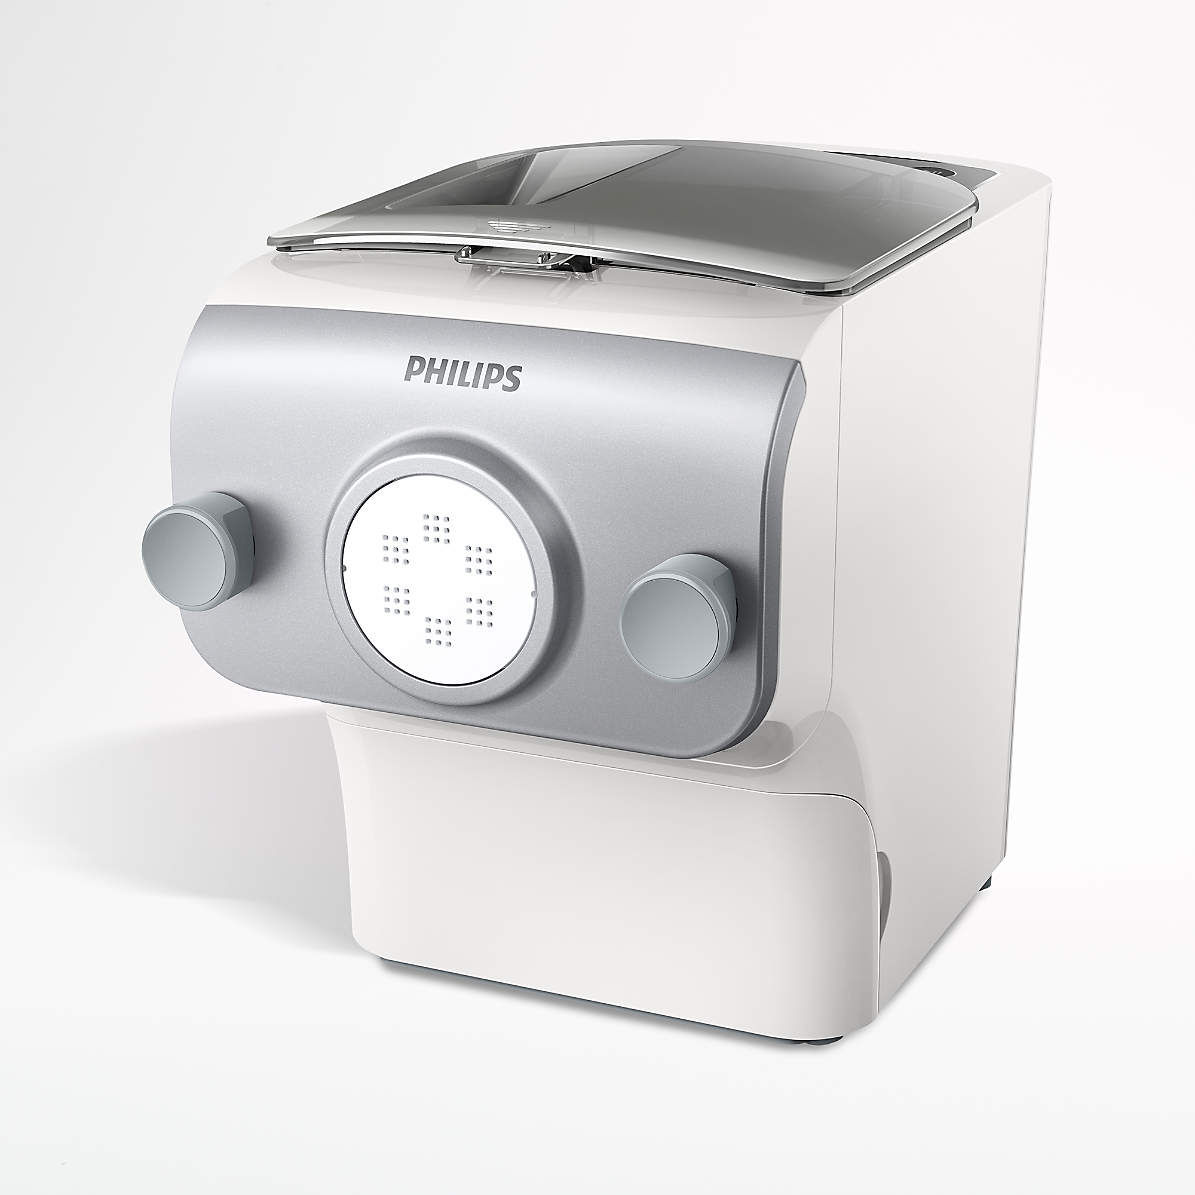 Product Testing: Philips Pasta Maker Take 2 - Suzie The Foodie